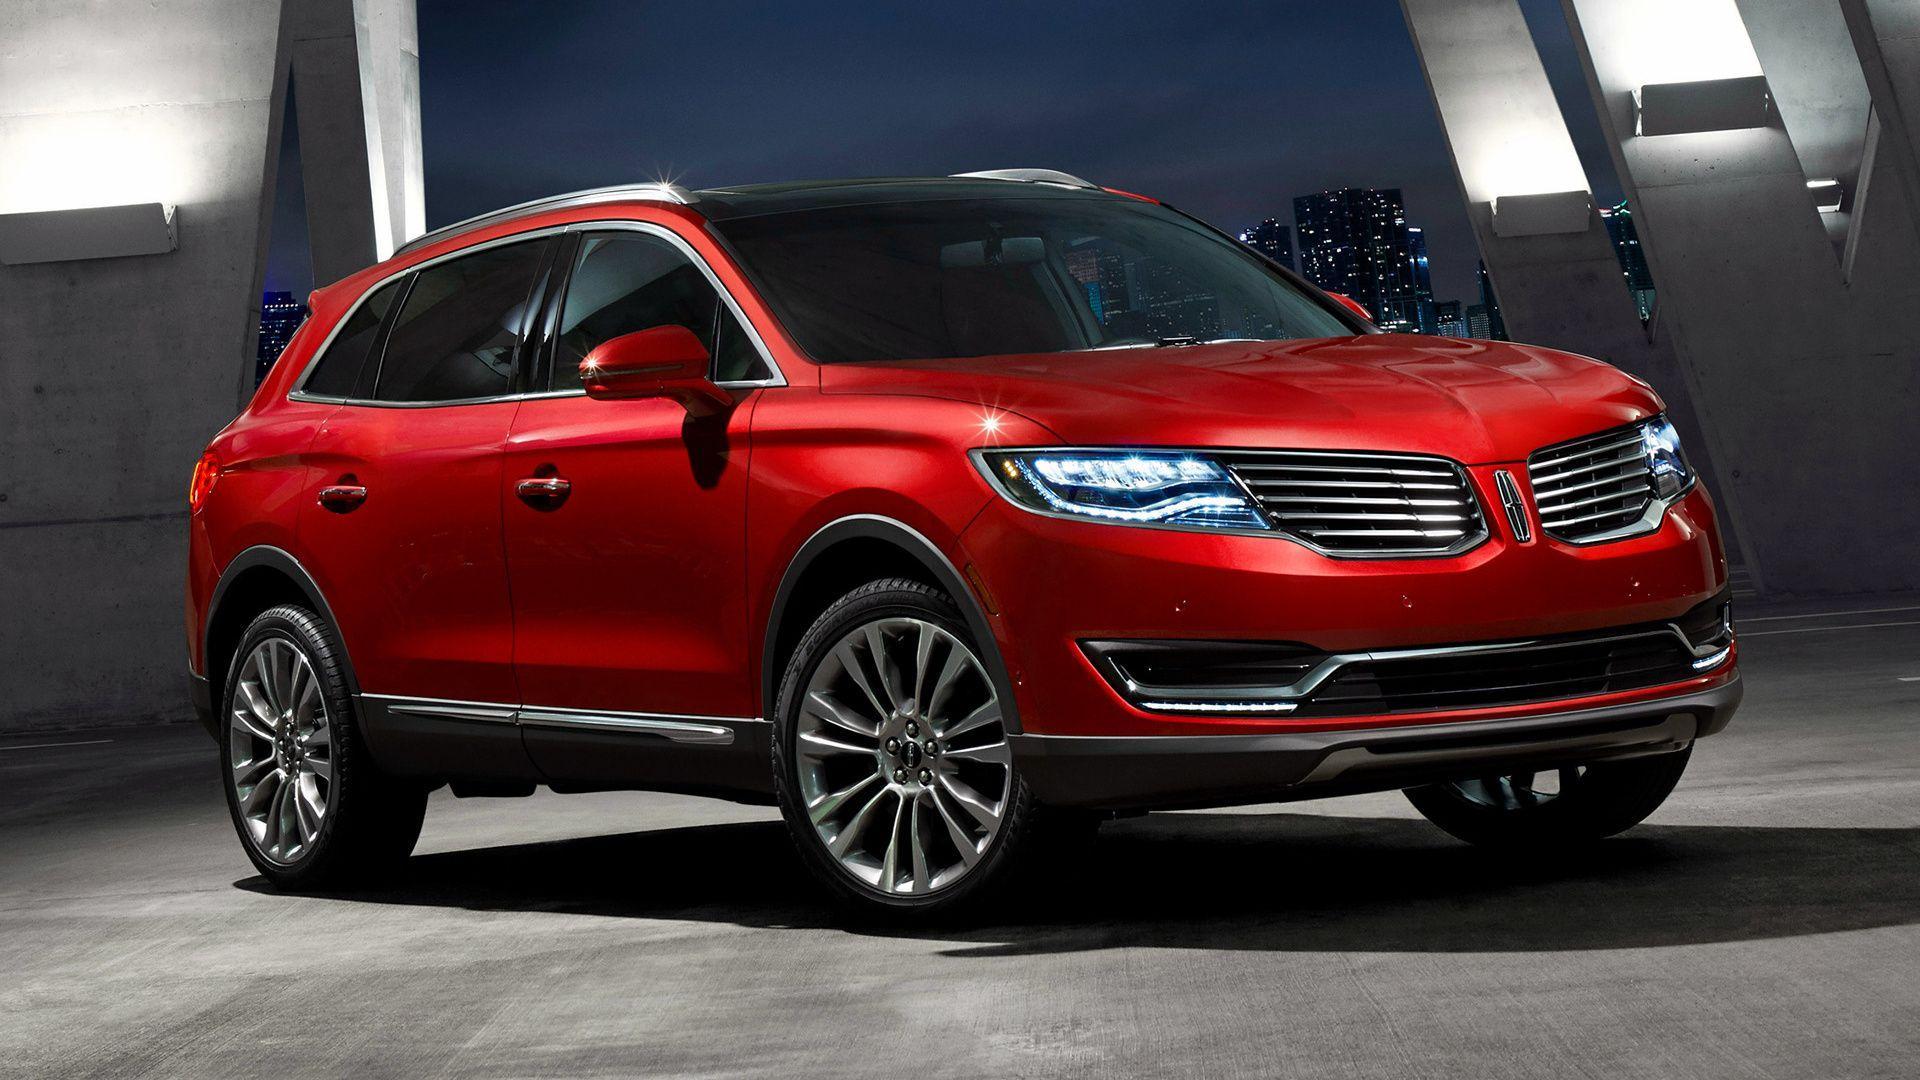 Lincoln MKX (2016) Wallpaper and HD Image